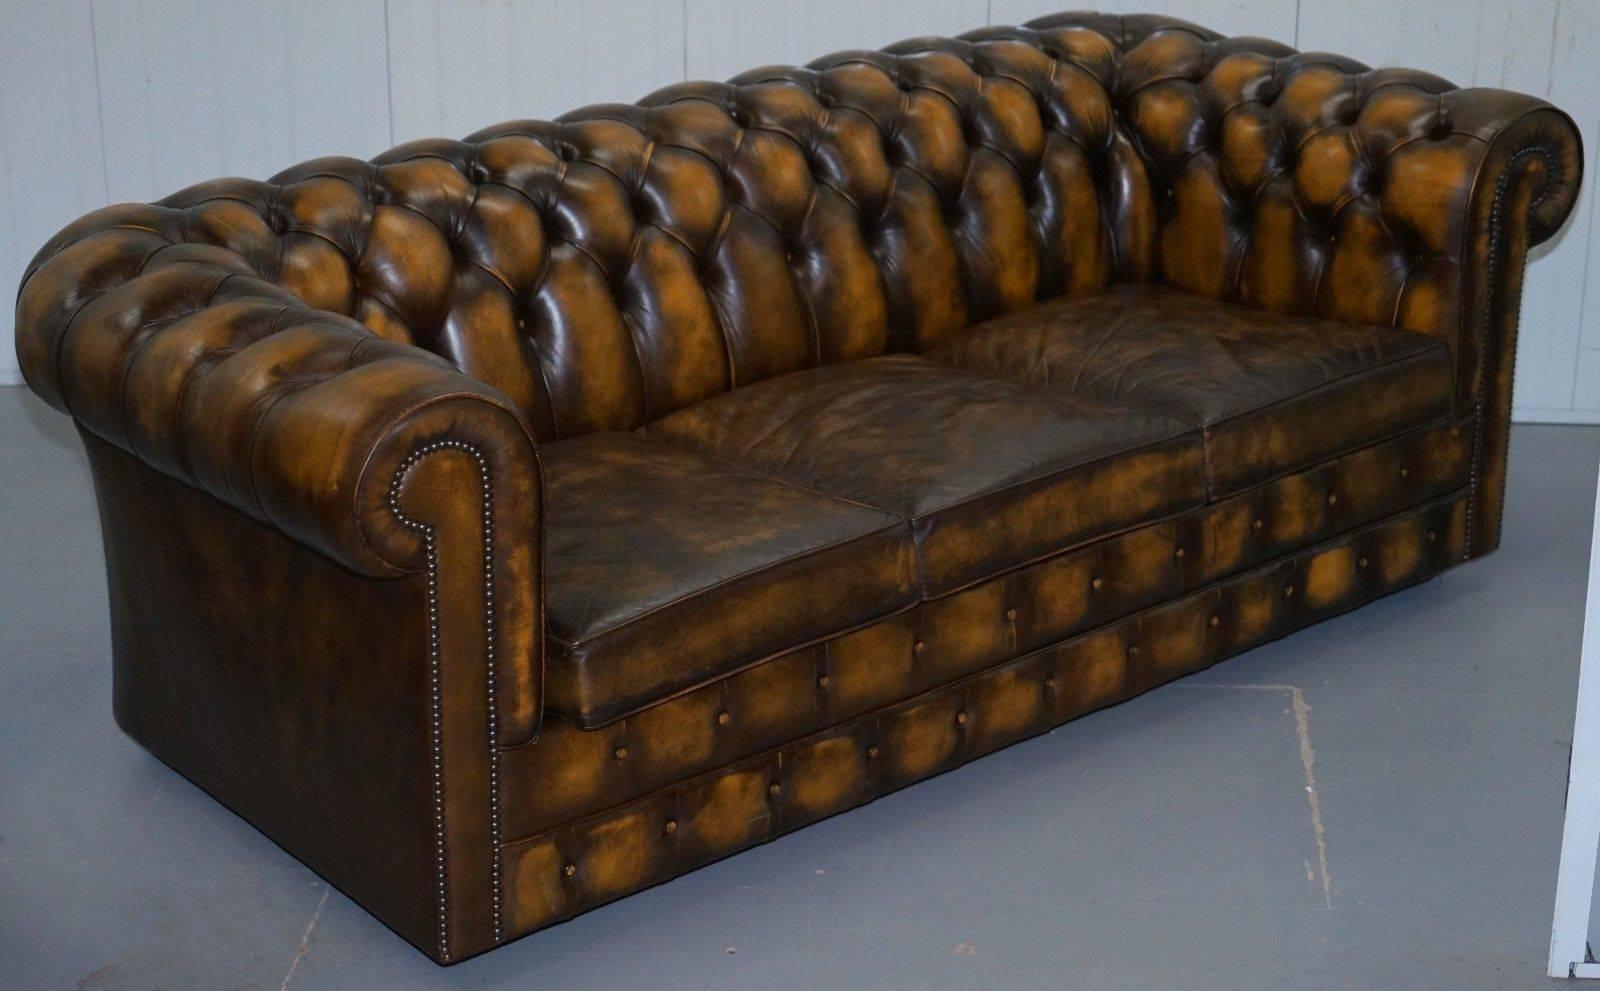 We are delighted to offer for sale this substantial Mill Brook Furnishings  hand dyed aged brown